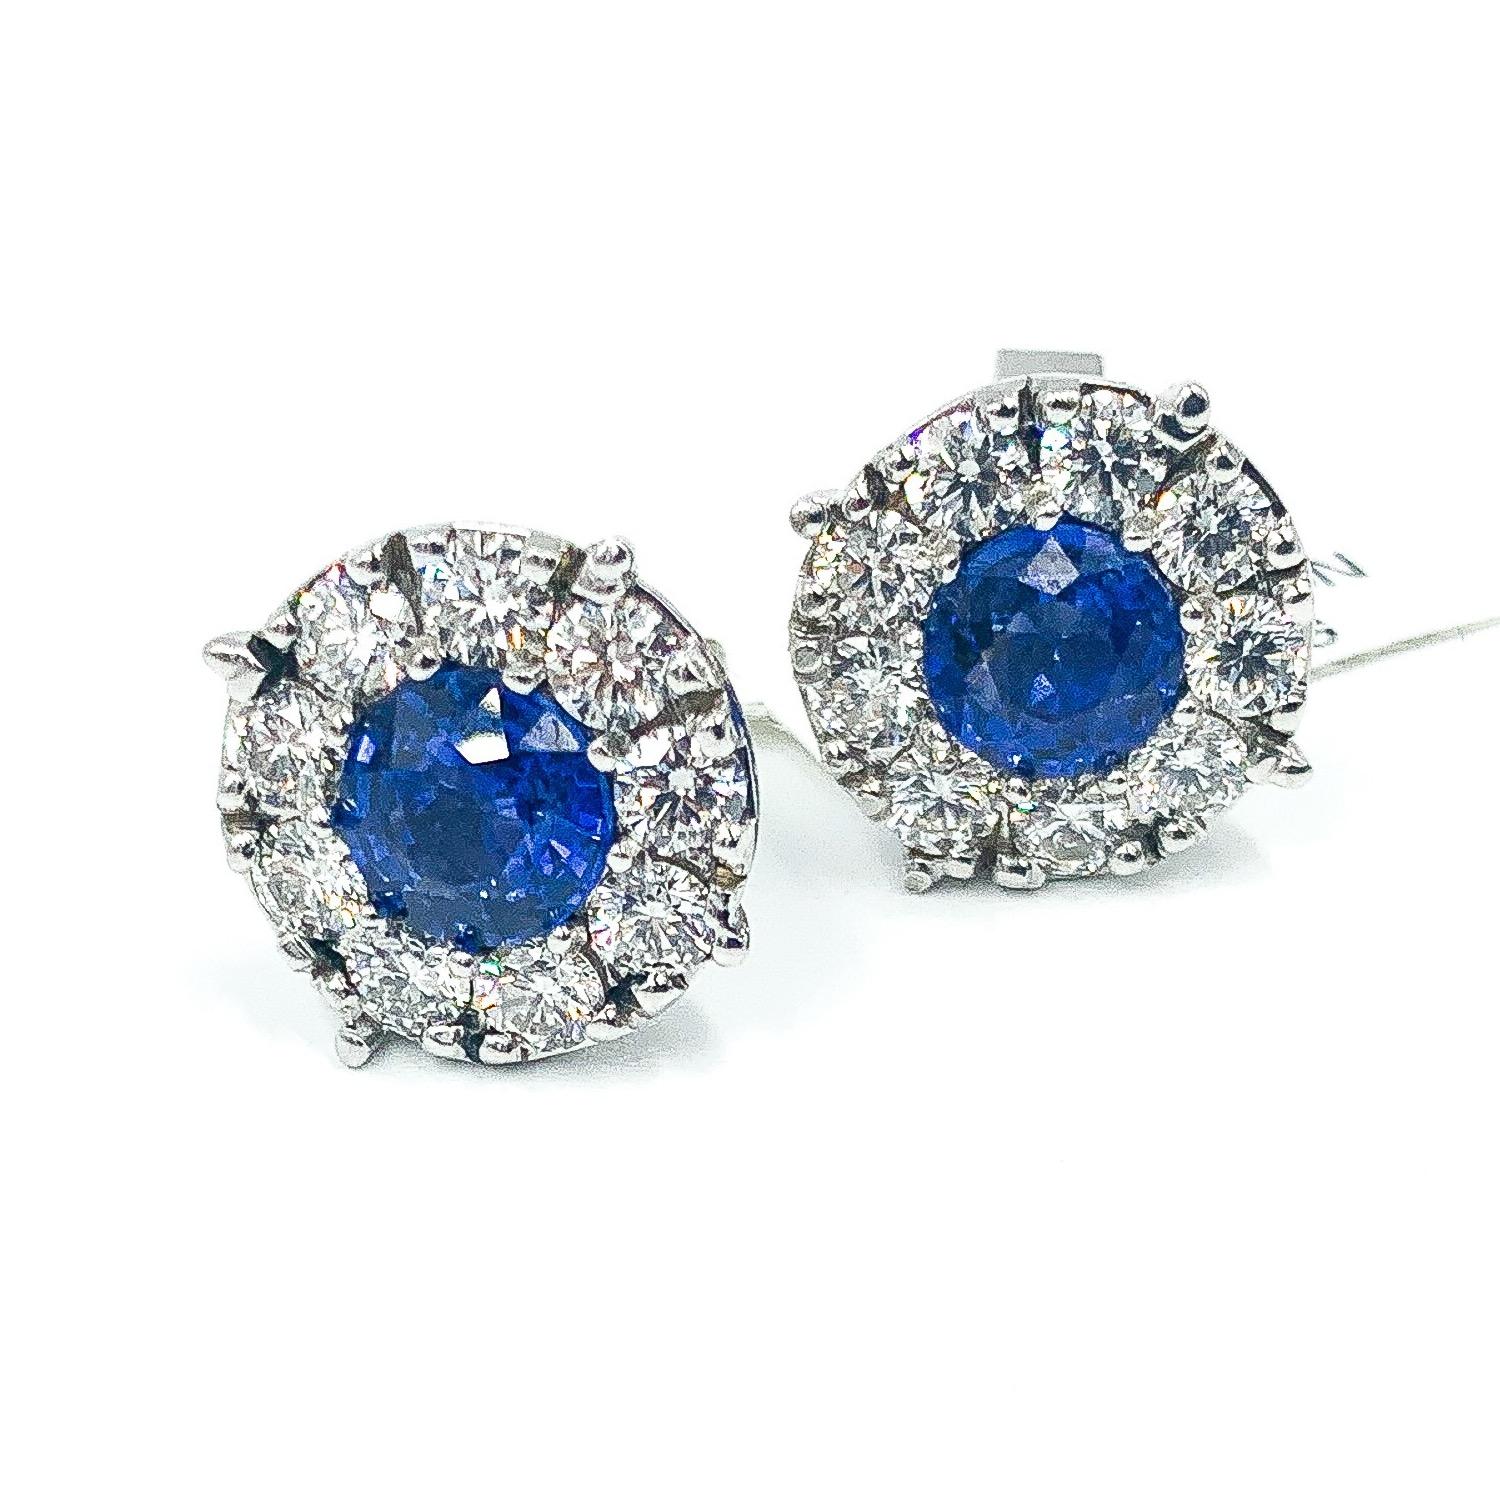 Ceylon sapphire has been revered for its rich vivid color, that tends to be a lighter and brighter blue than the dark blue sapphires famously found throughout Australia and Thailand. These earrings feature two beautifully matched round Ceylon